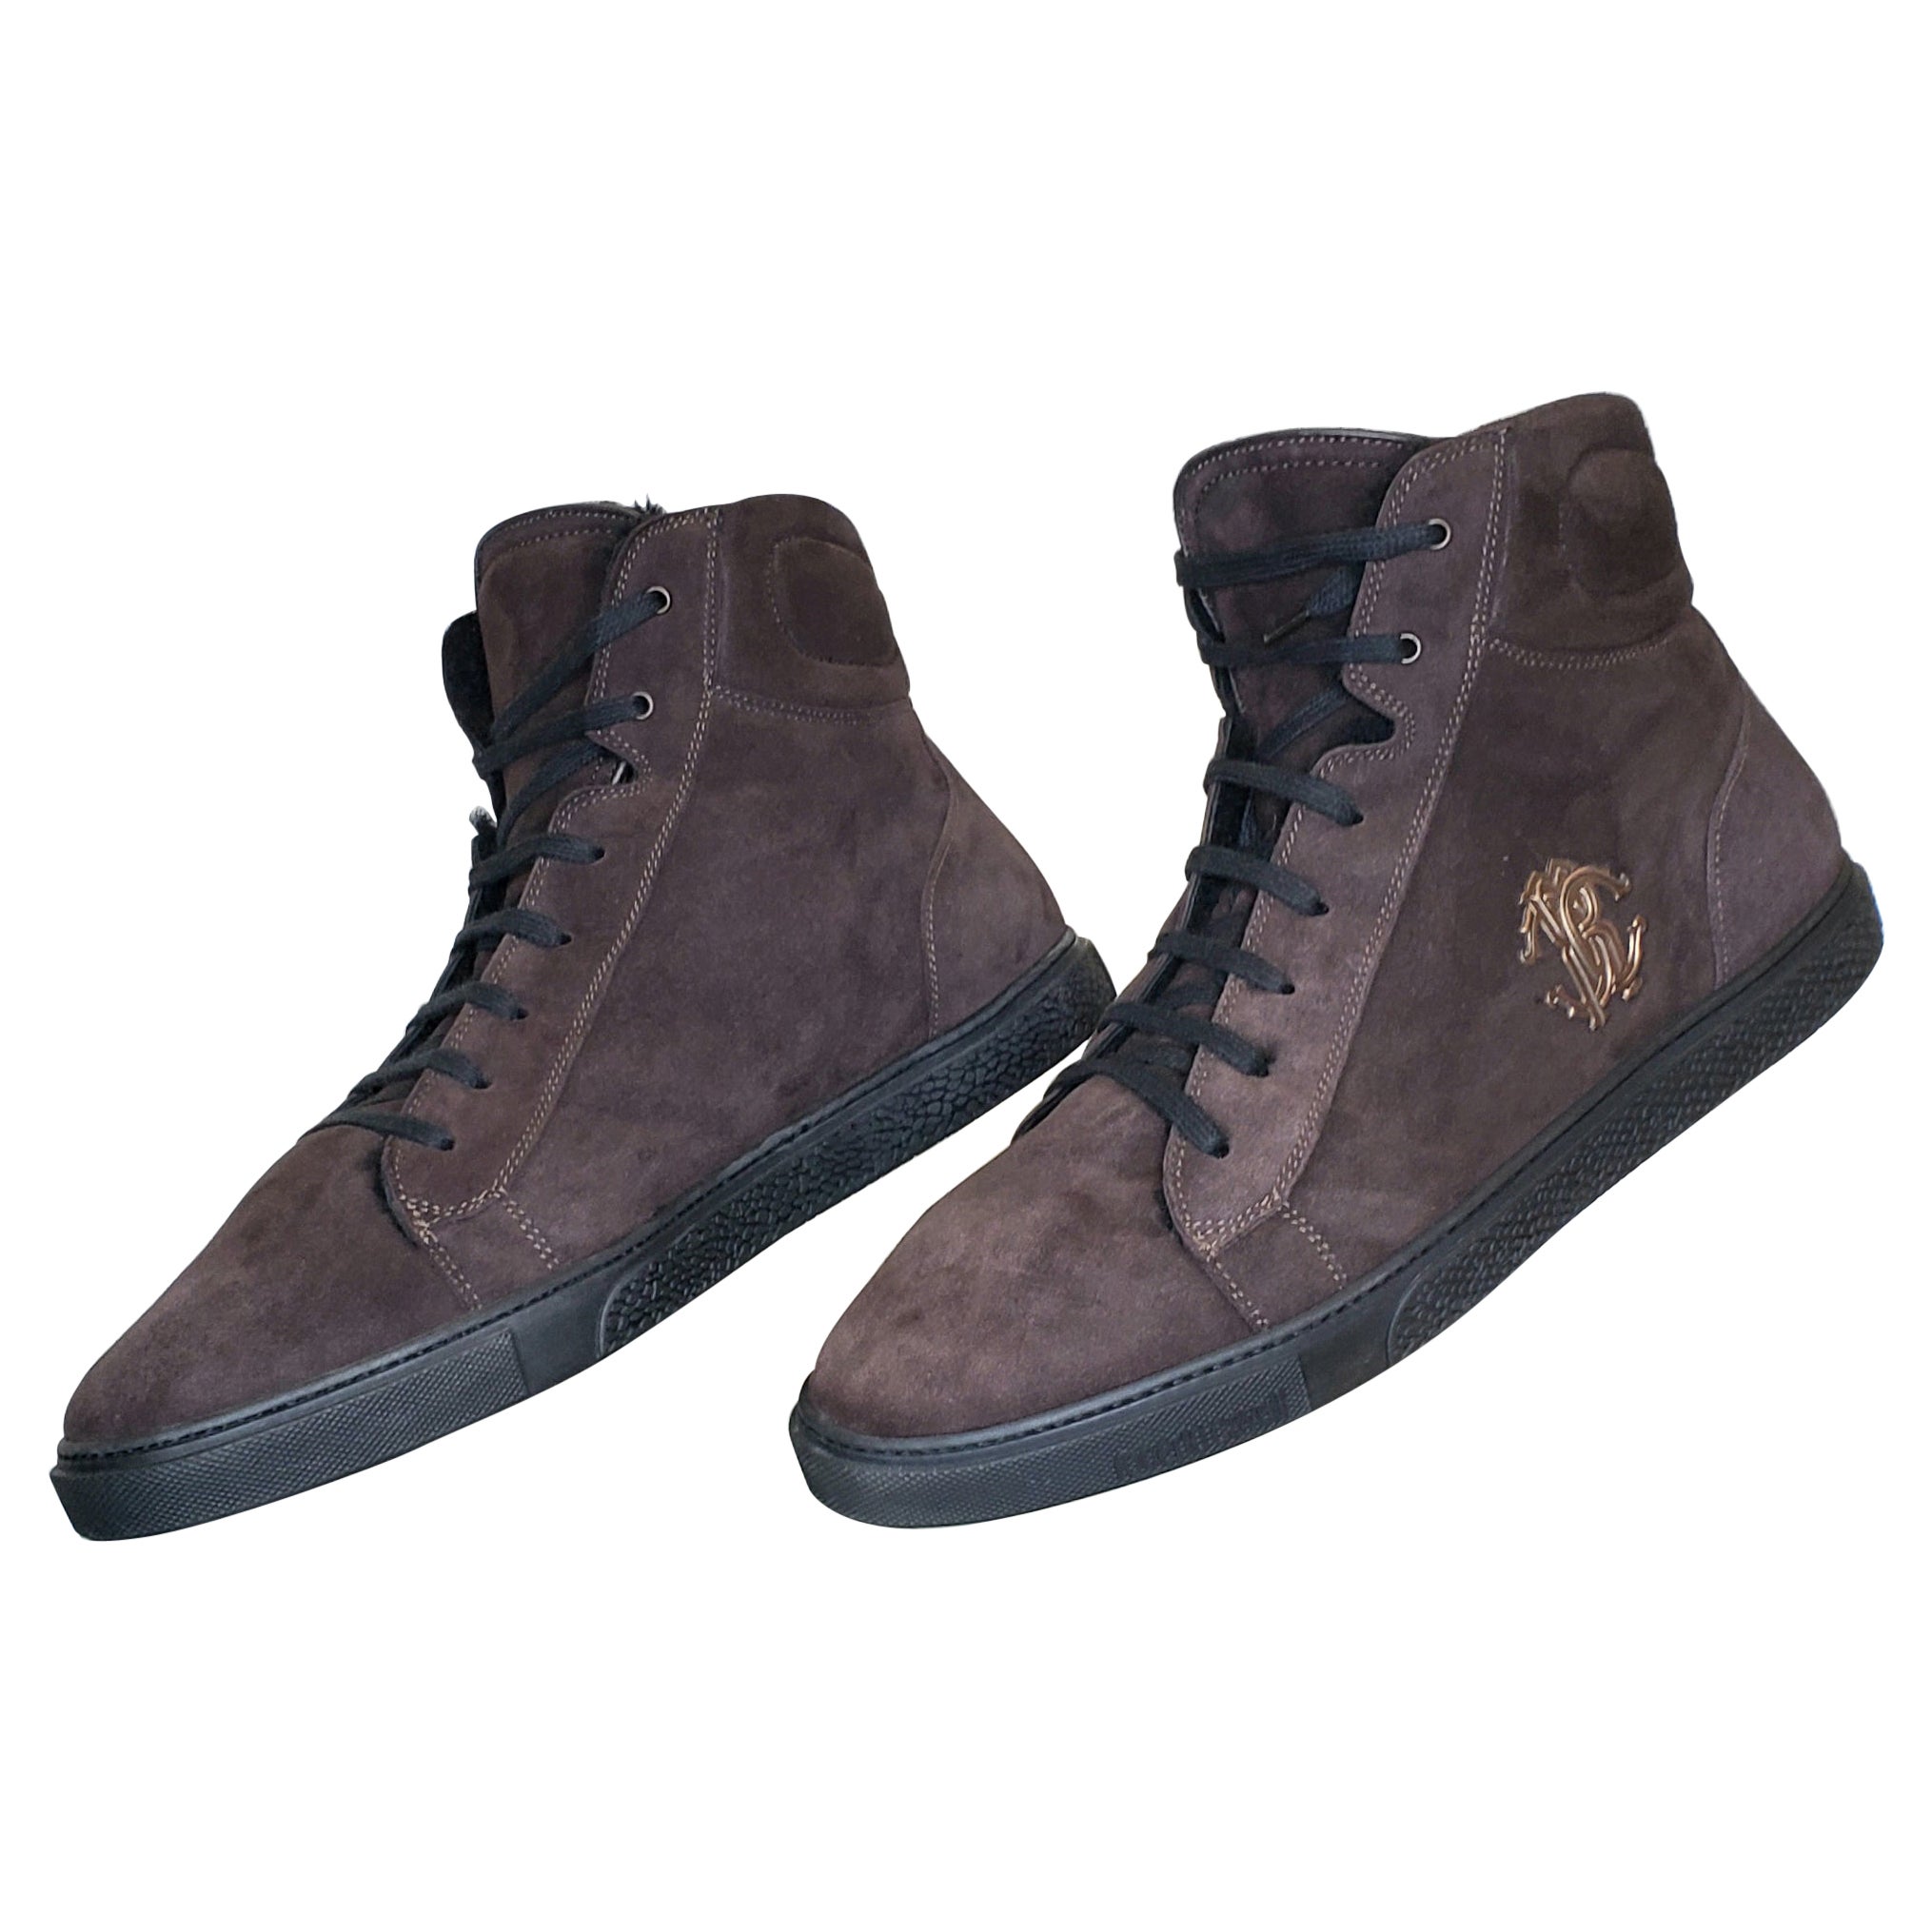 New ROBERTO CAVALLI BROWN SUEDE FUR LINED SHEARLING HIGH TOP SNEAKERS 42.5 -9.5